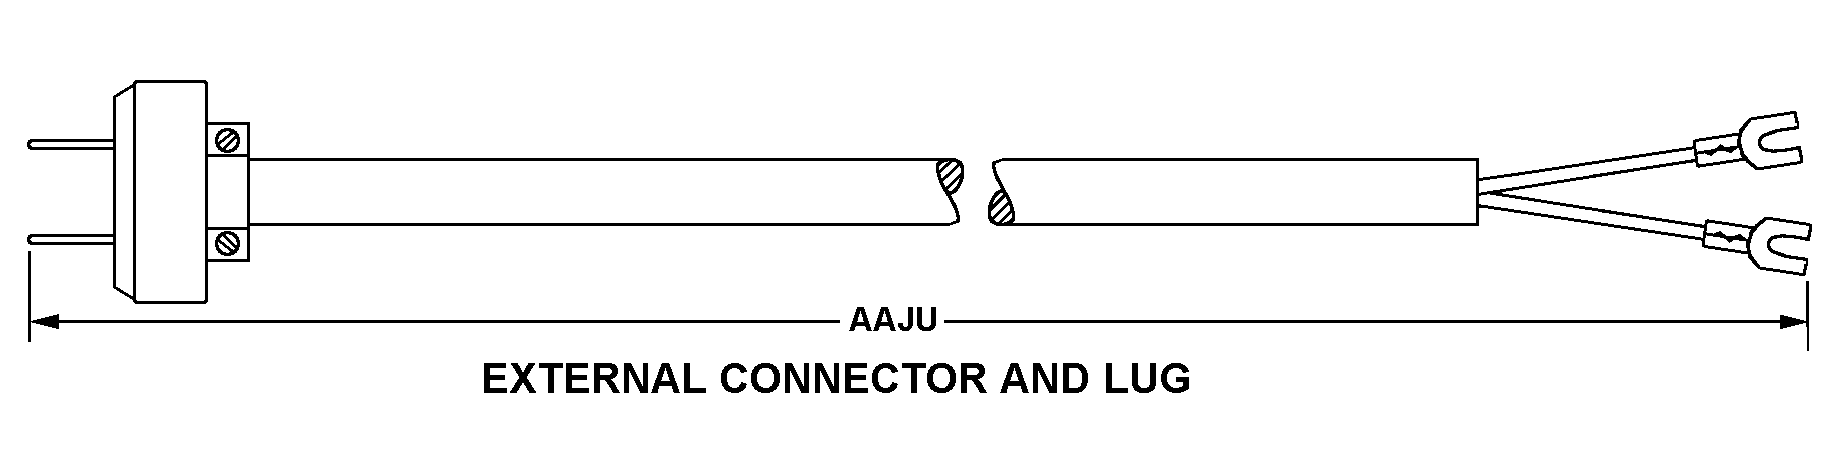 EXTERNAL CONNECTOR AND LUG style nsn 5995-01-039-2560